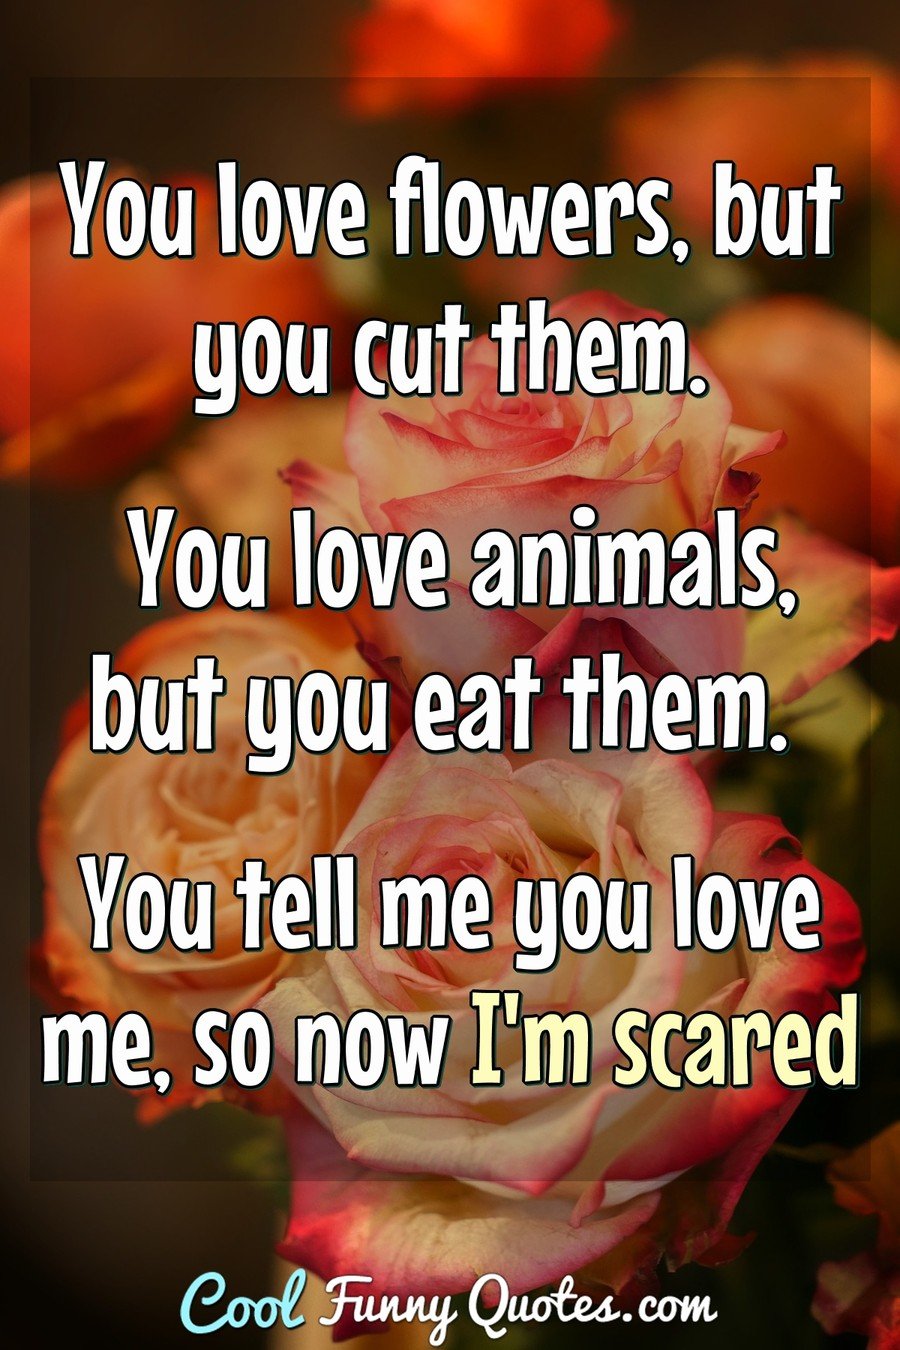 You love flowers, but you cut them. You love animals, but you eat them